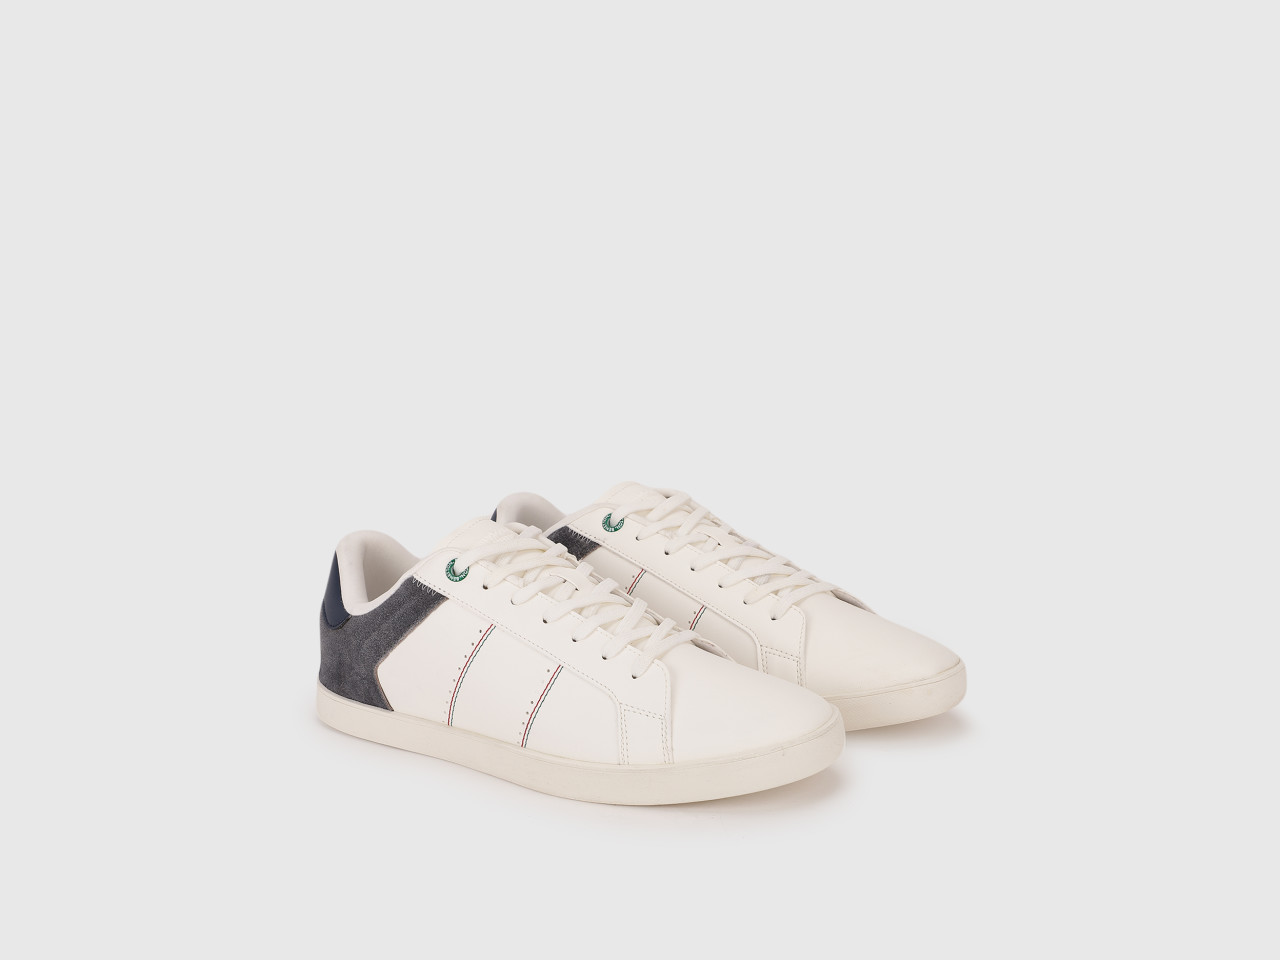 Sneakers Zapatilla Casual Mujer Blanco-Plata. United Colors Of Benetton . -  Ziwi Shoes